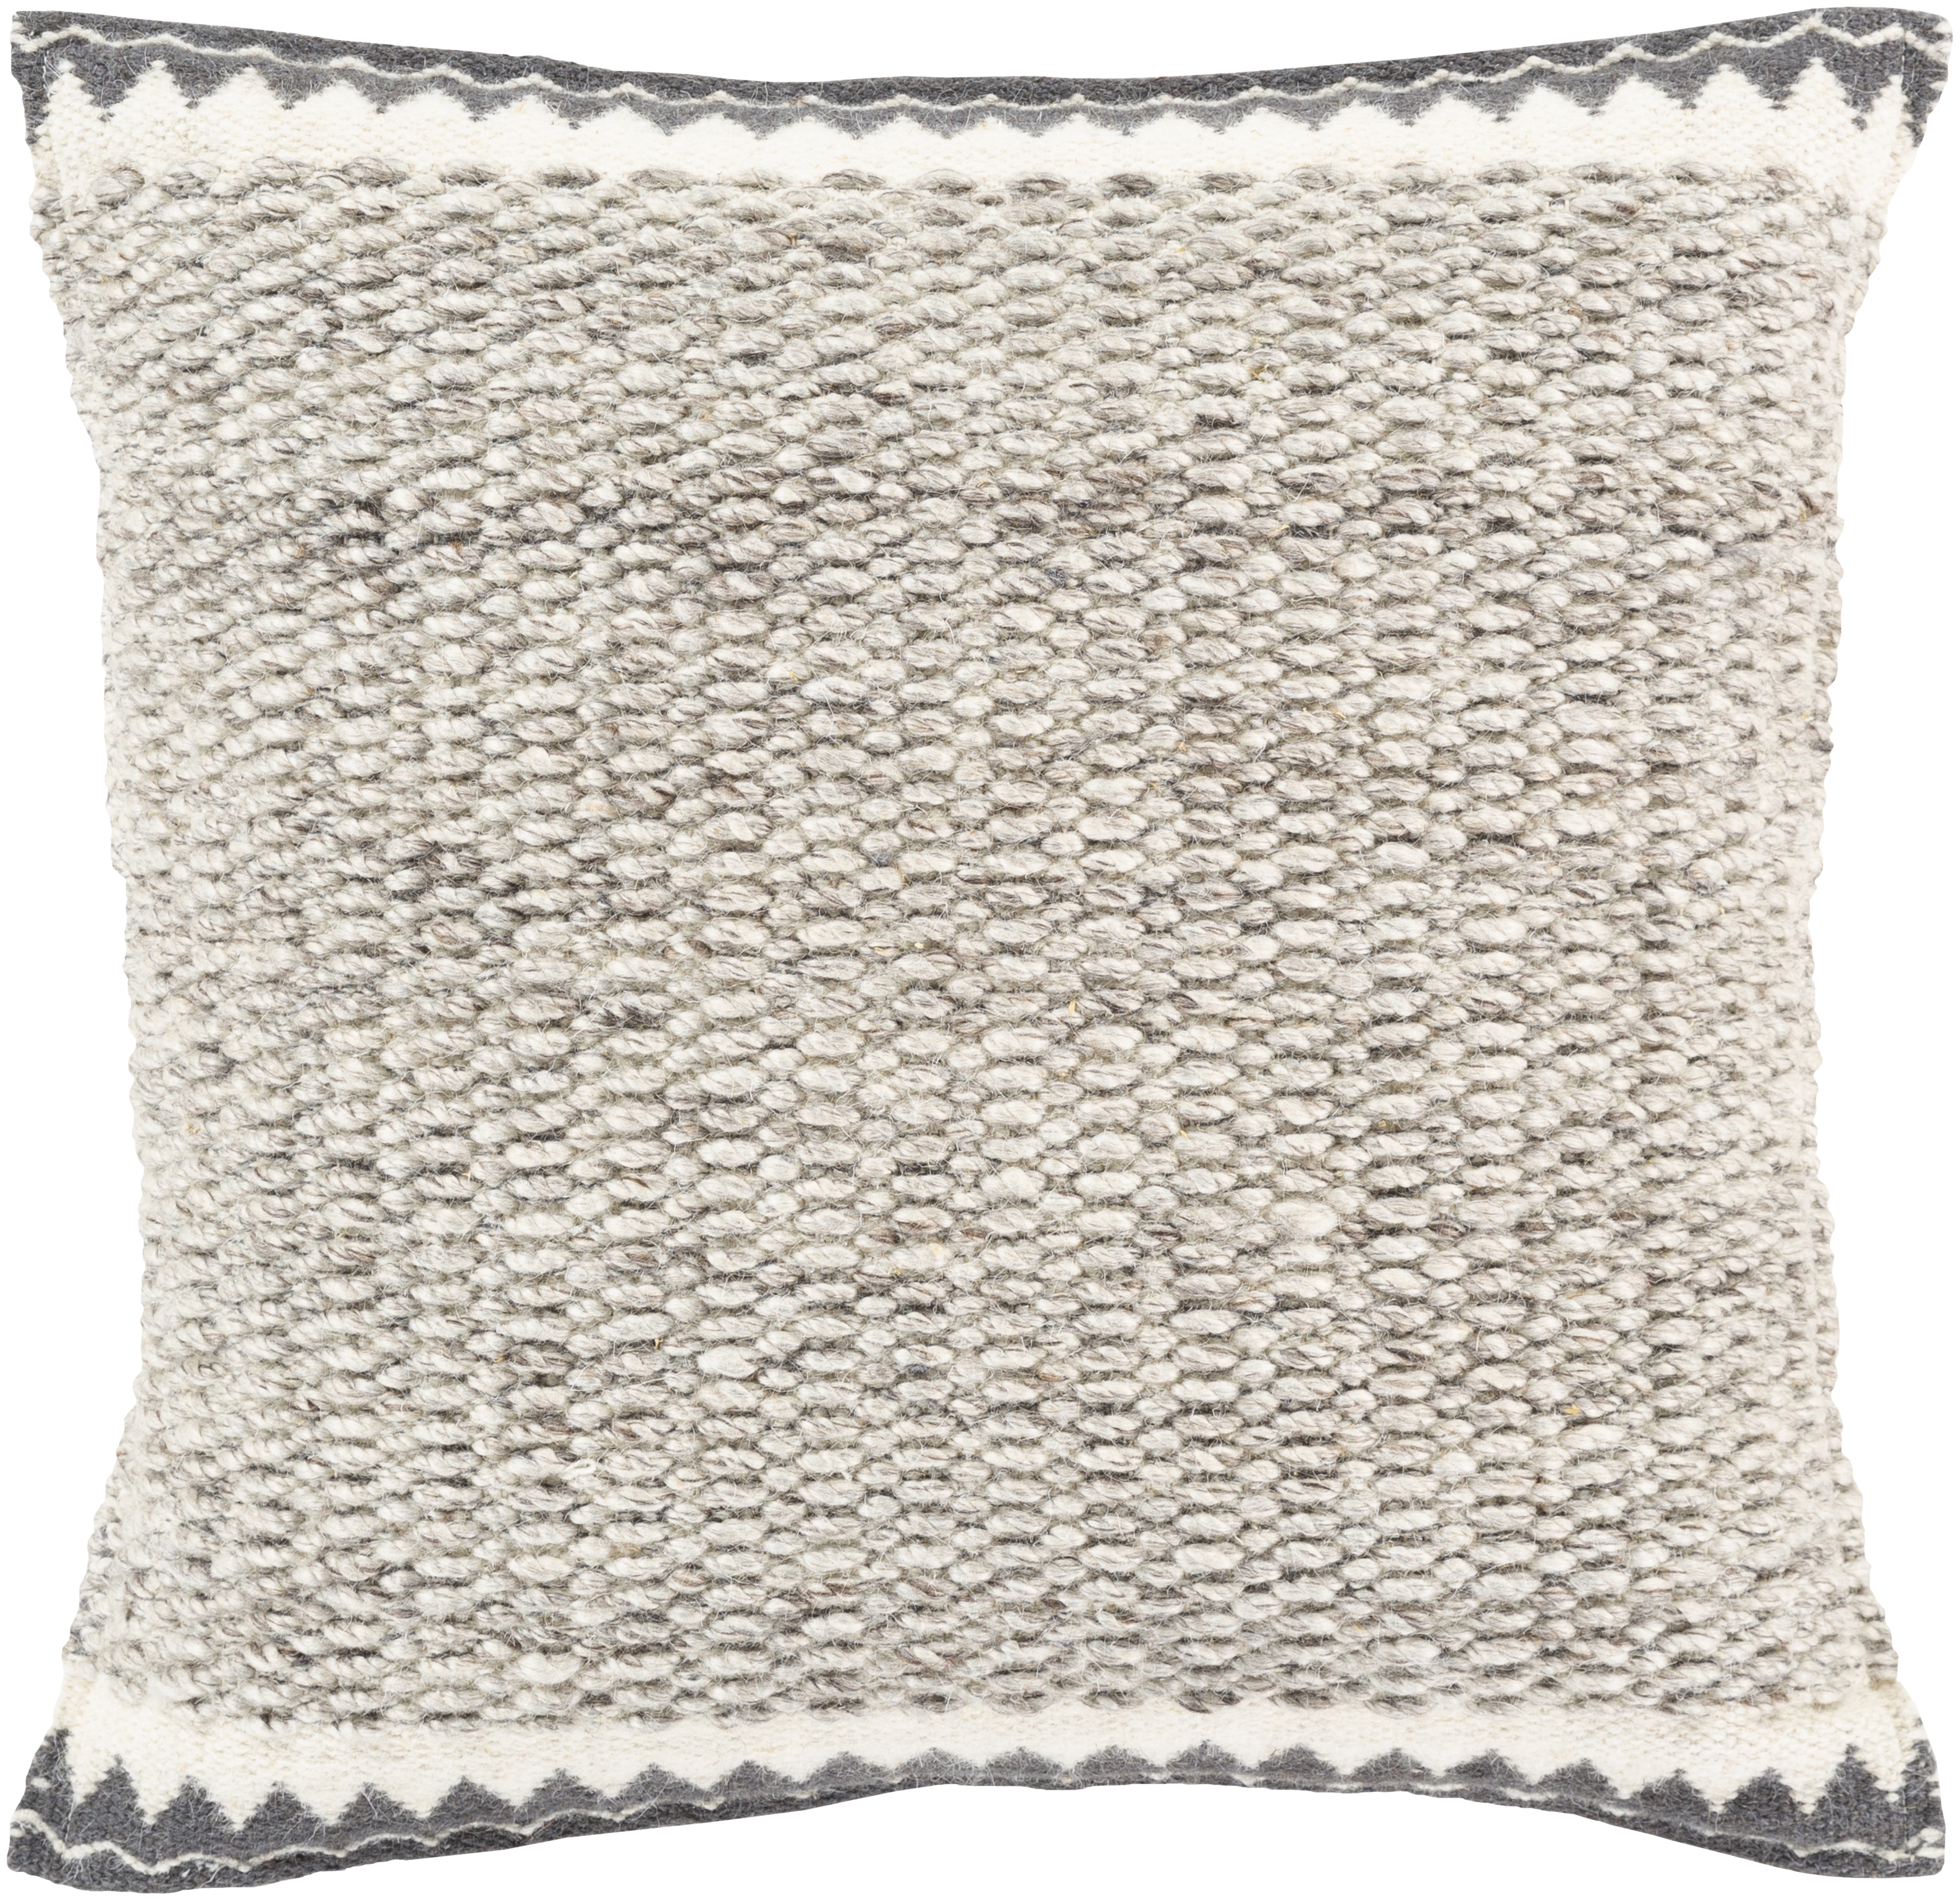 Faroe Throw Pillow, 20" x 20", with down insert - Image 0